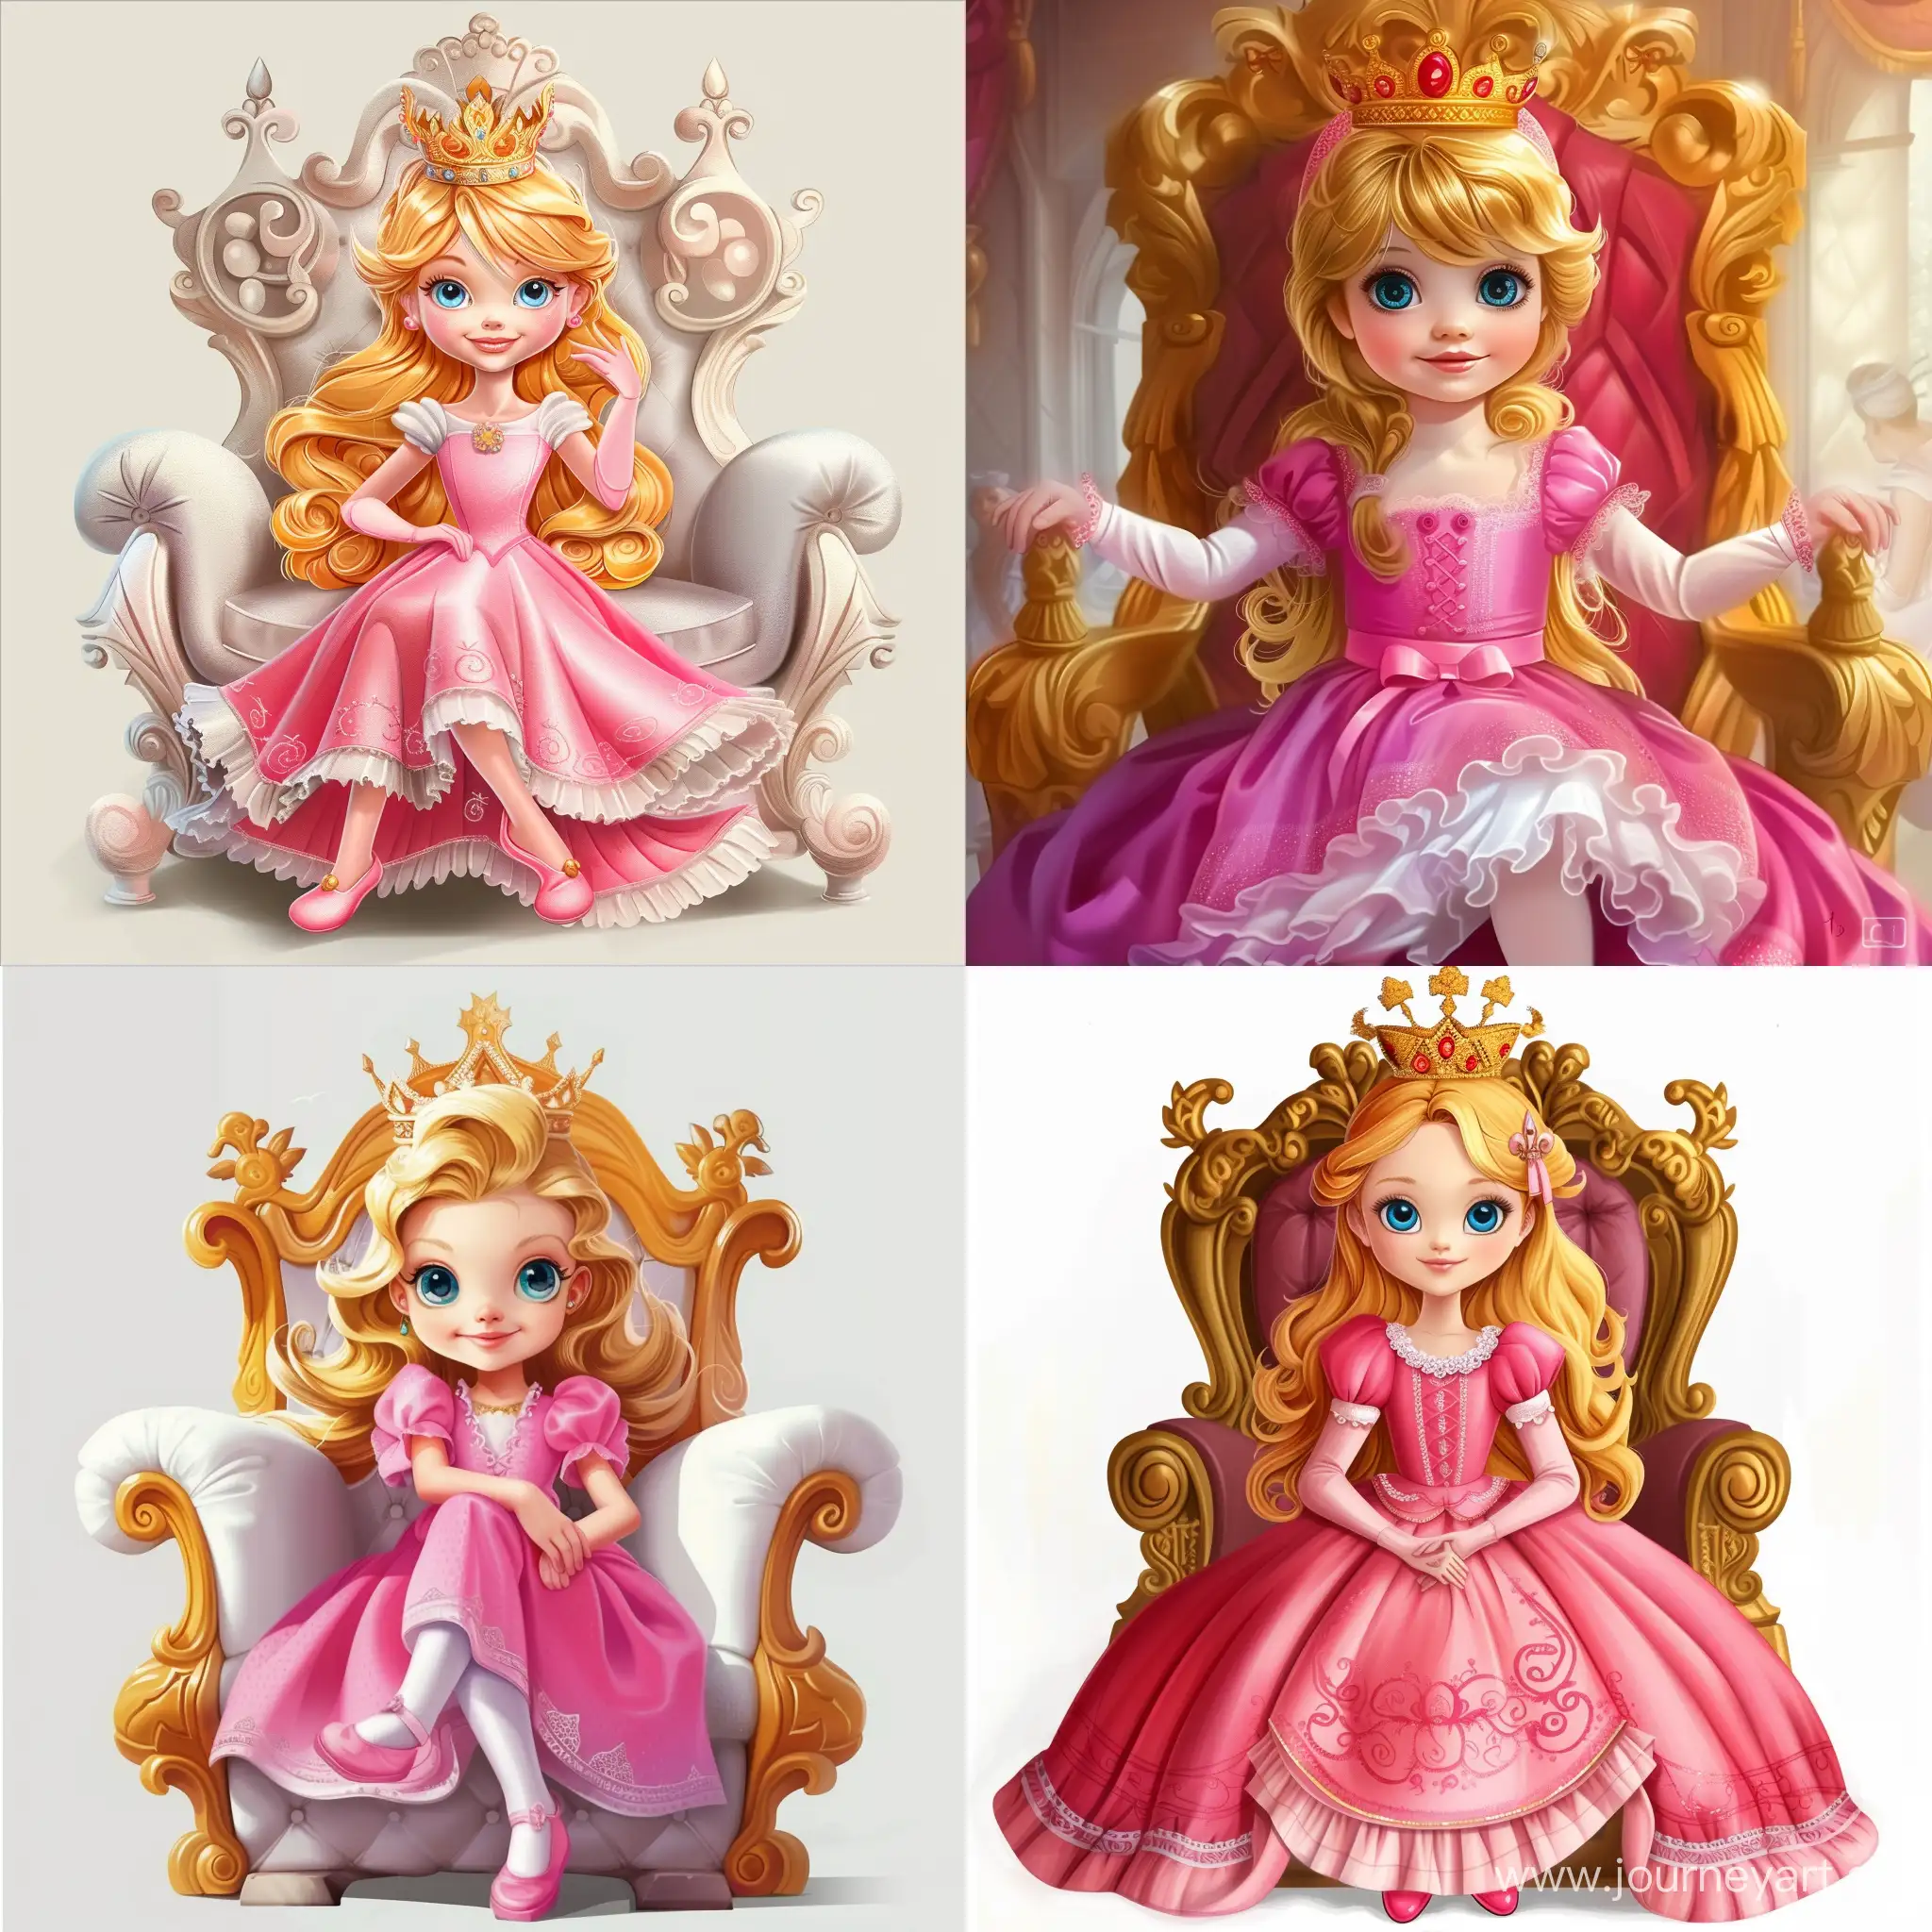 Adorable-Princess-Girl-Sitting-on-Golden-Throne-in-Pink-Dress